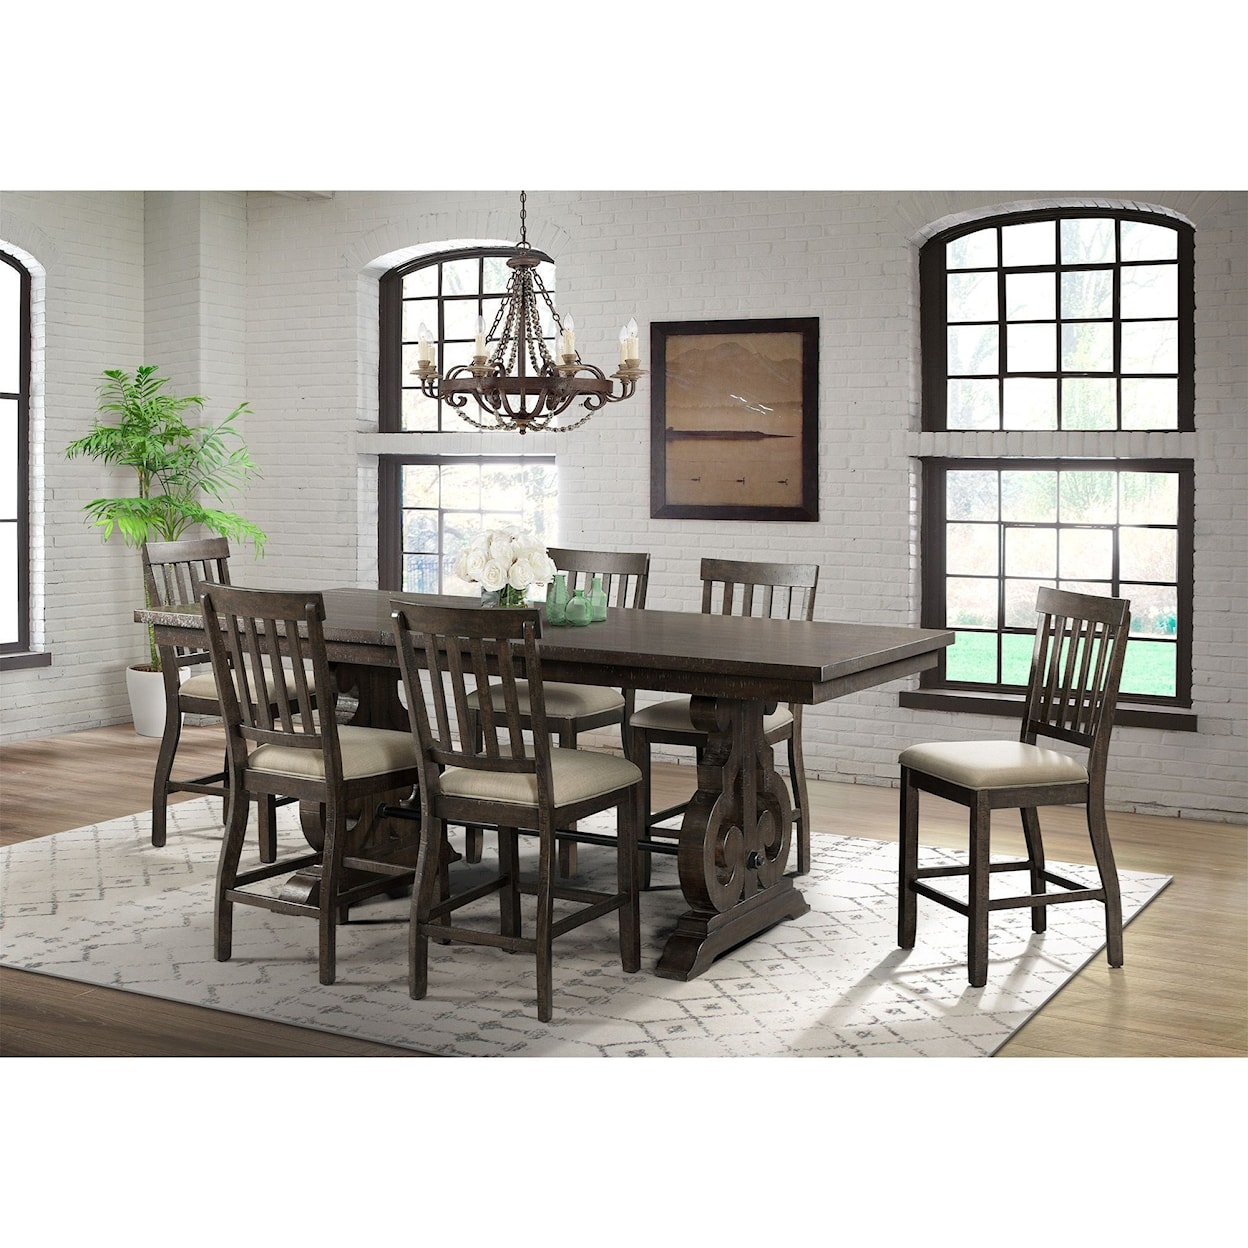 Elements Stone 7-Piece Counter Height Dining Set